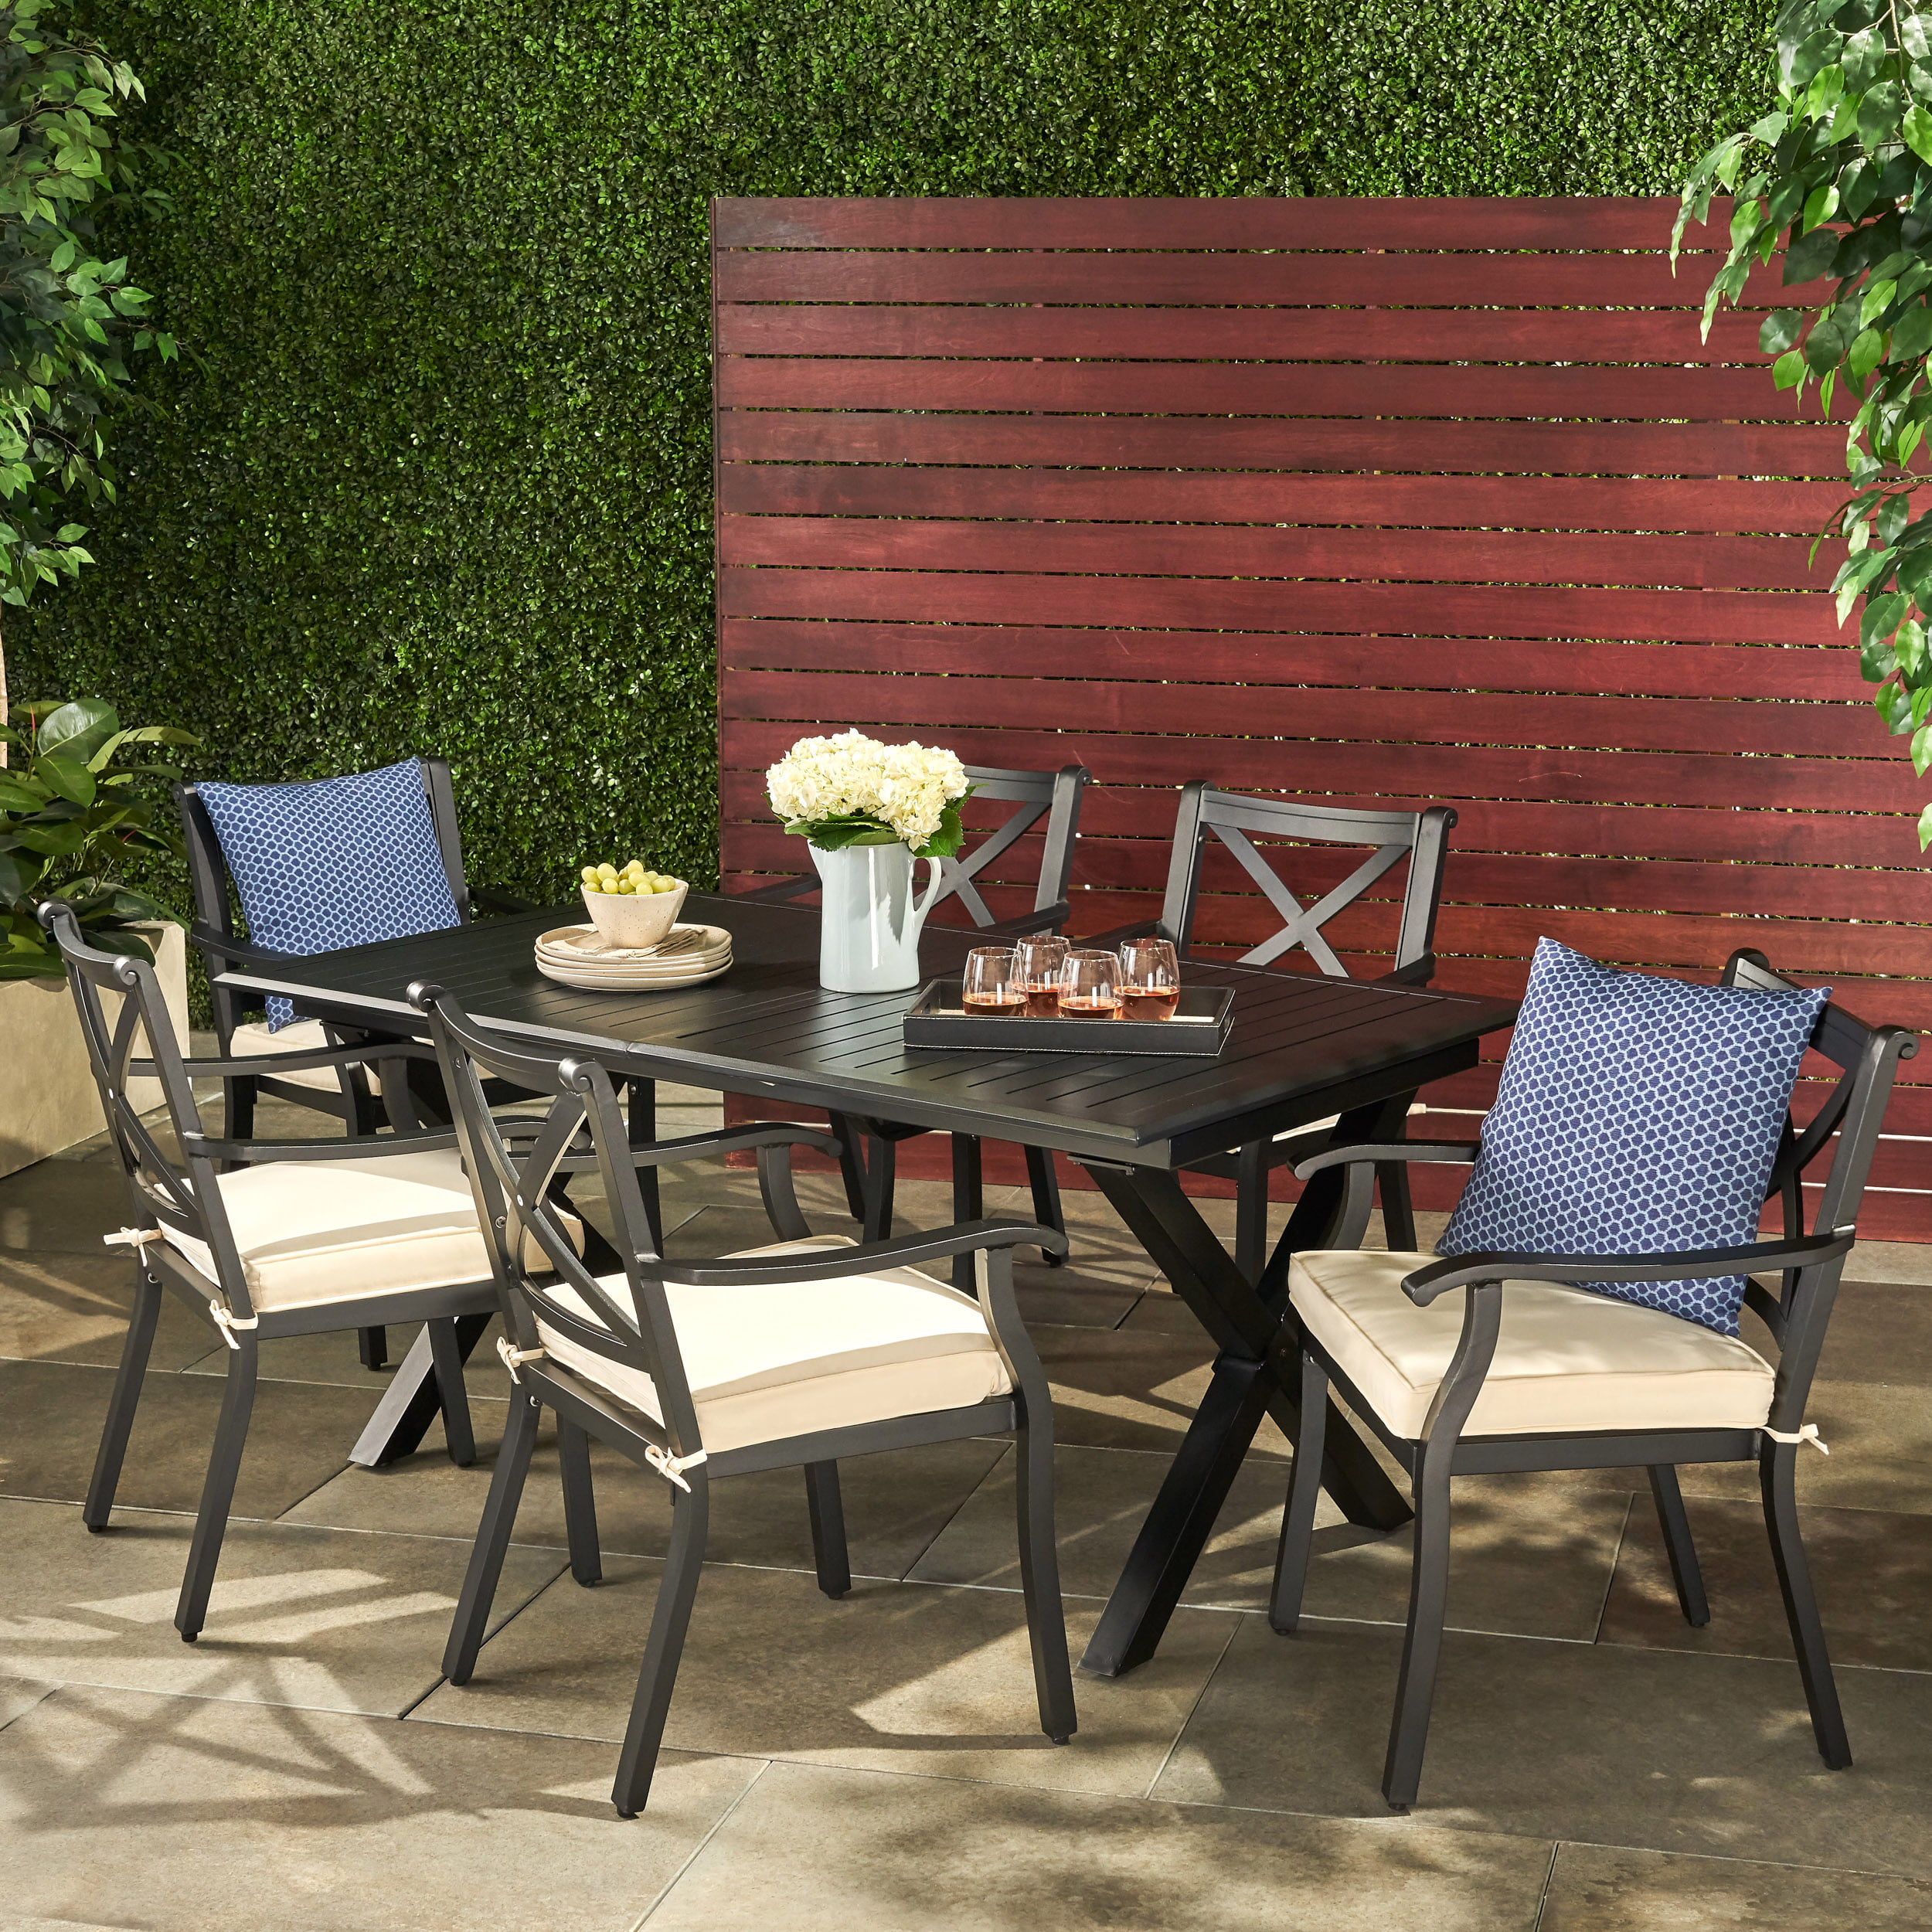 Eowyn Outdoor 7 Piece Cast Aluminum Dining Set With Ivory Water